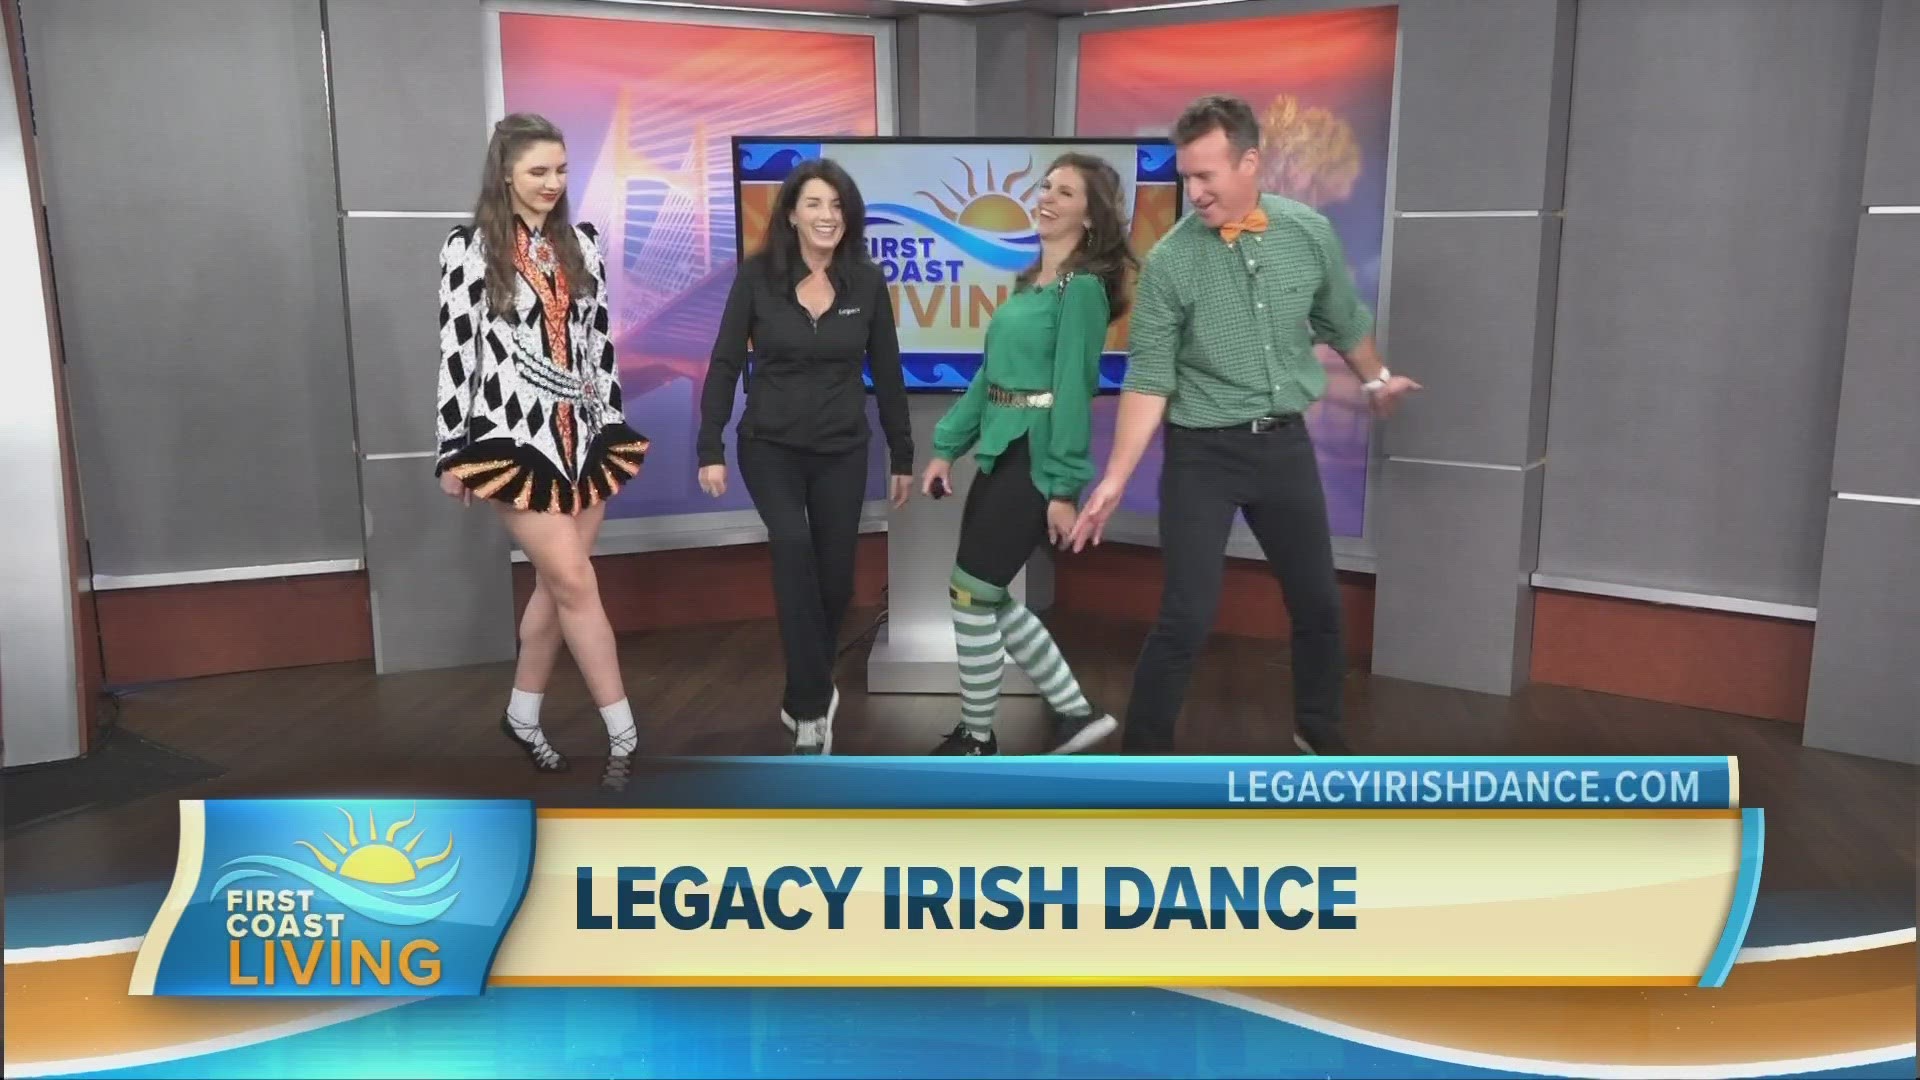 It's a dance studio that brings Irish dance, music and culture to life. Patty Darrah and Noel join Mike and Jordan for an Irish Jig in time for the big holiday!